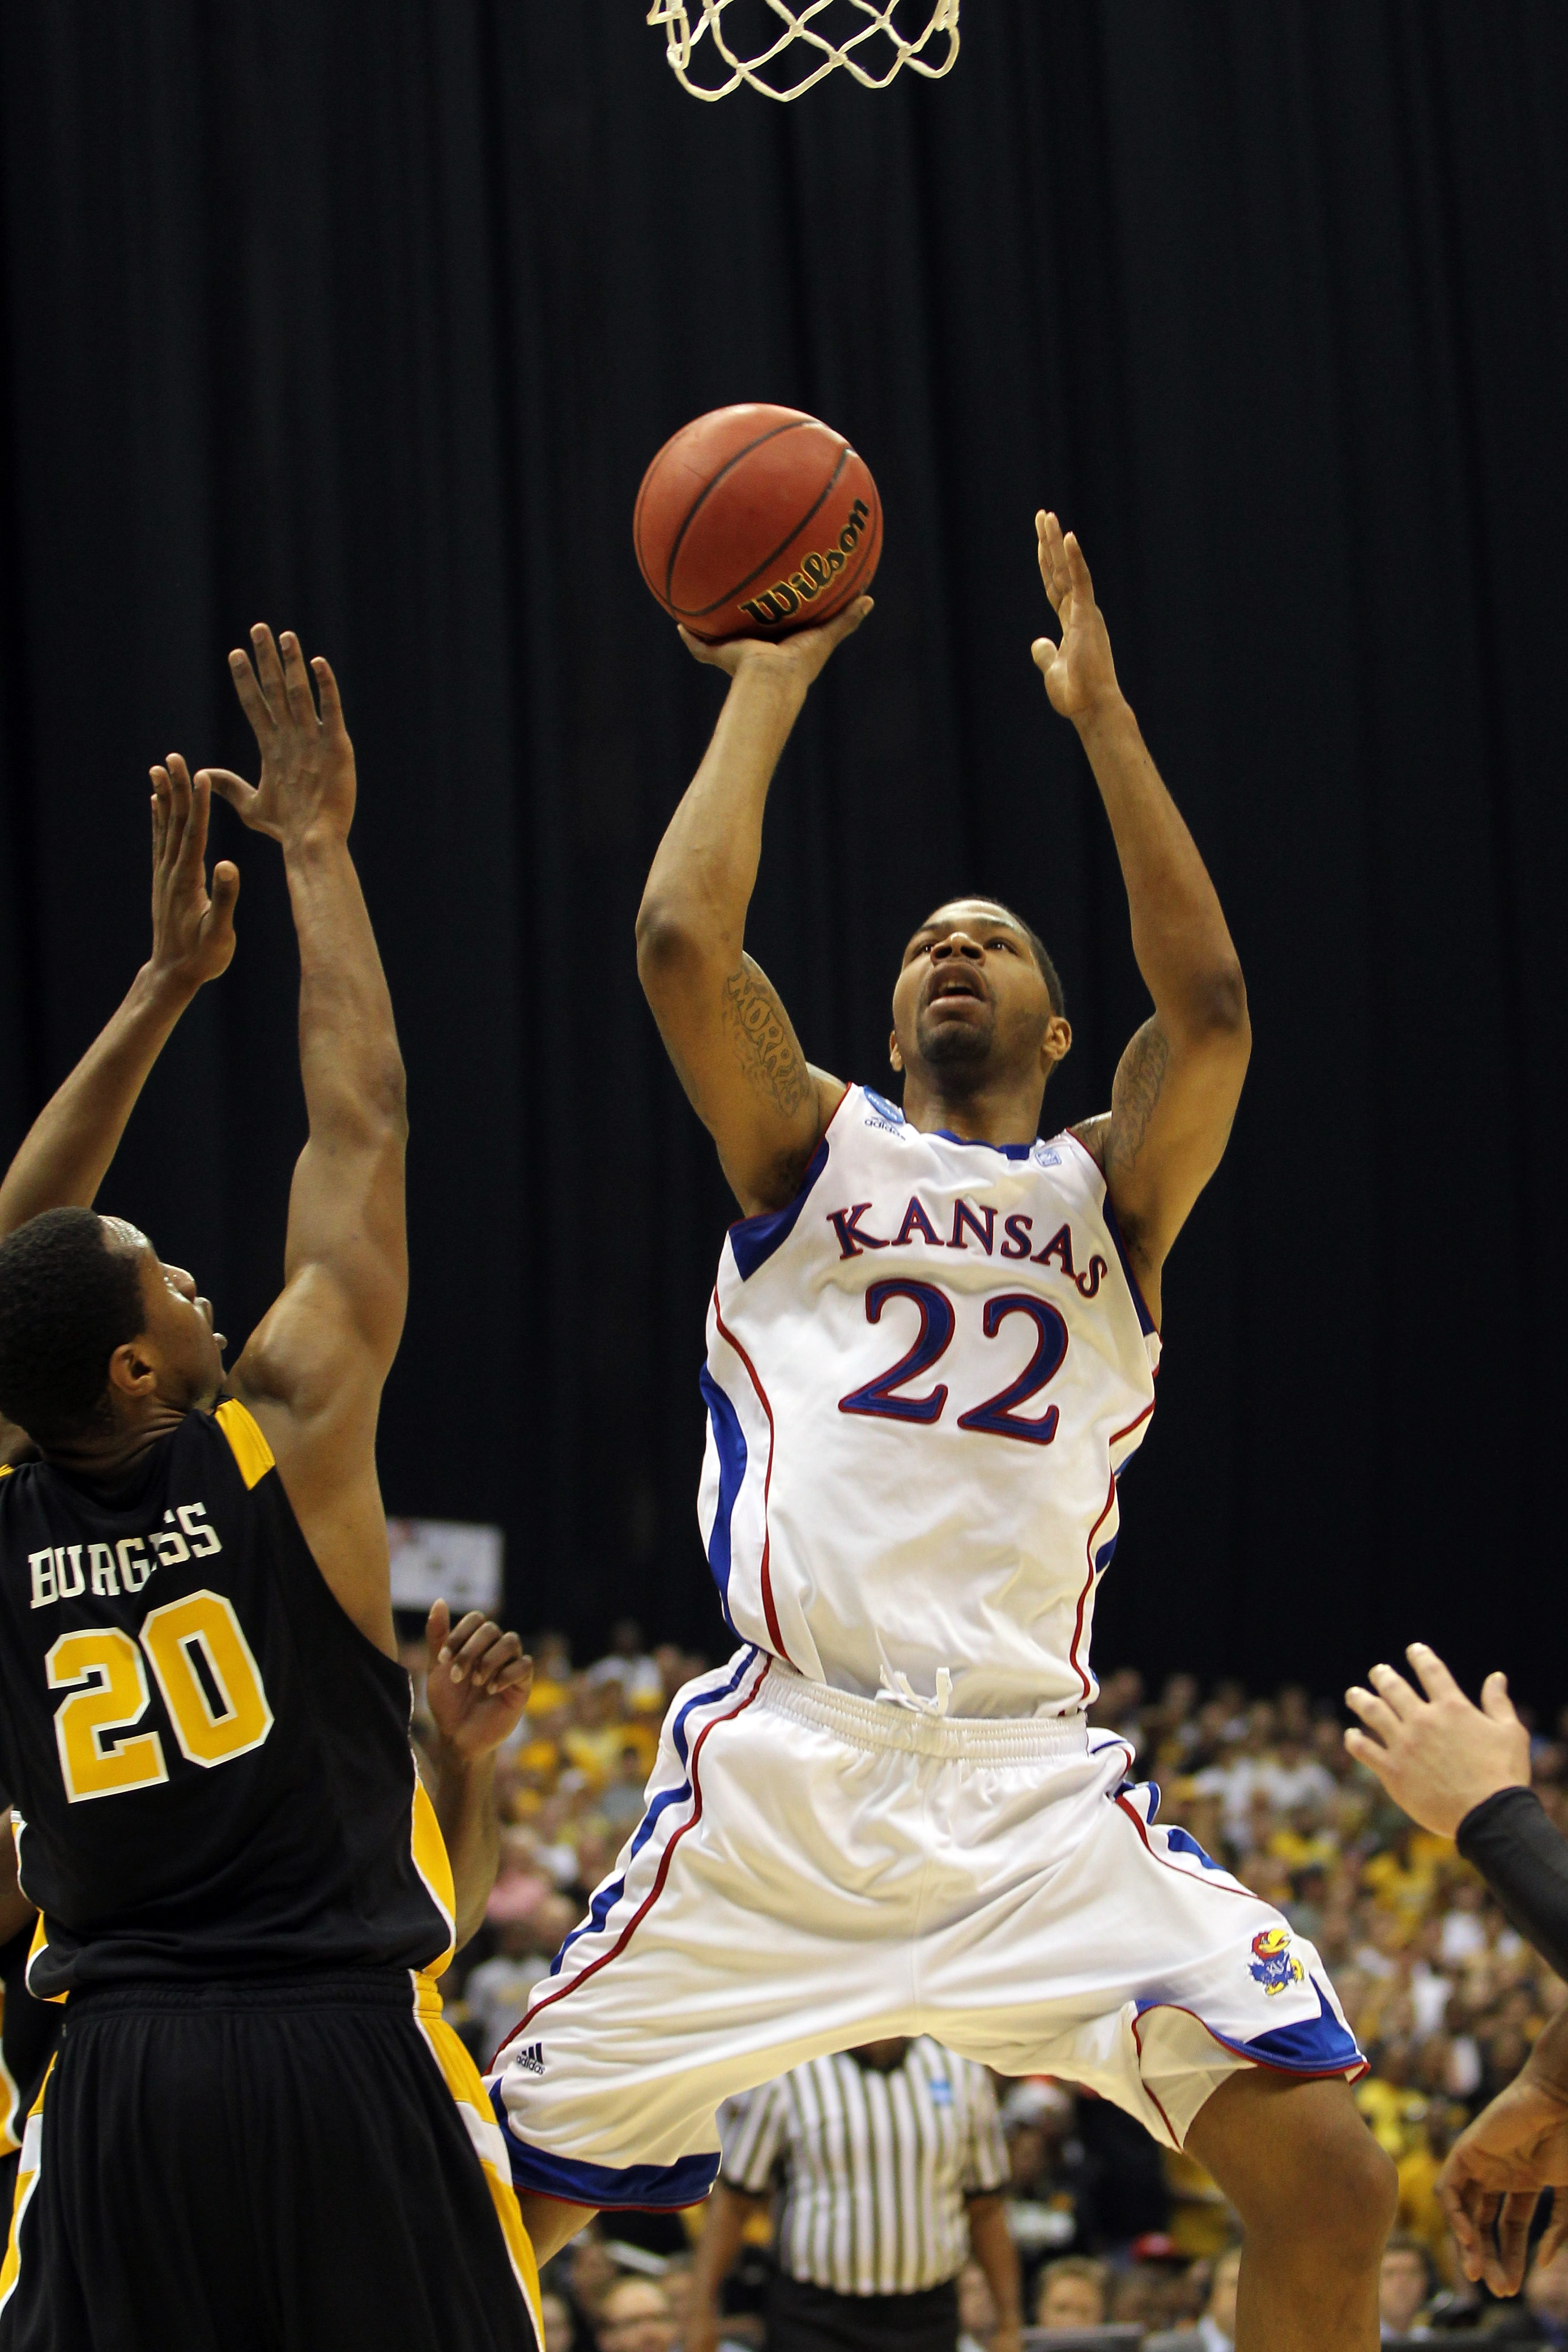 SAN ANTONIO, TX - MARCH 27:  Marcus Morris #22 of the Kansas Jayhawks puts up a shot against Bradford Burgess #20 of the Virginia Commonwealth Rams during the southwest regional final of the 2011 NCAA men's basketball tournament at the Alamodome on March